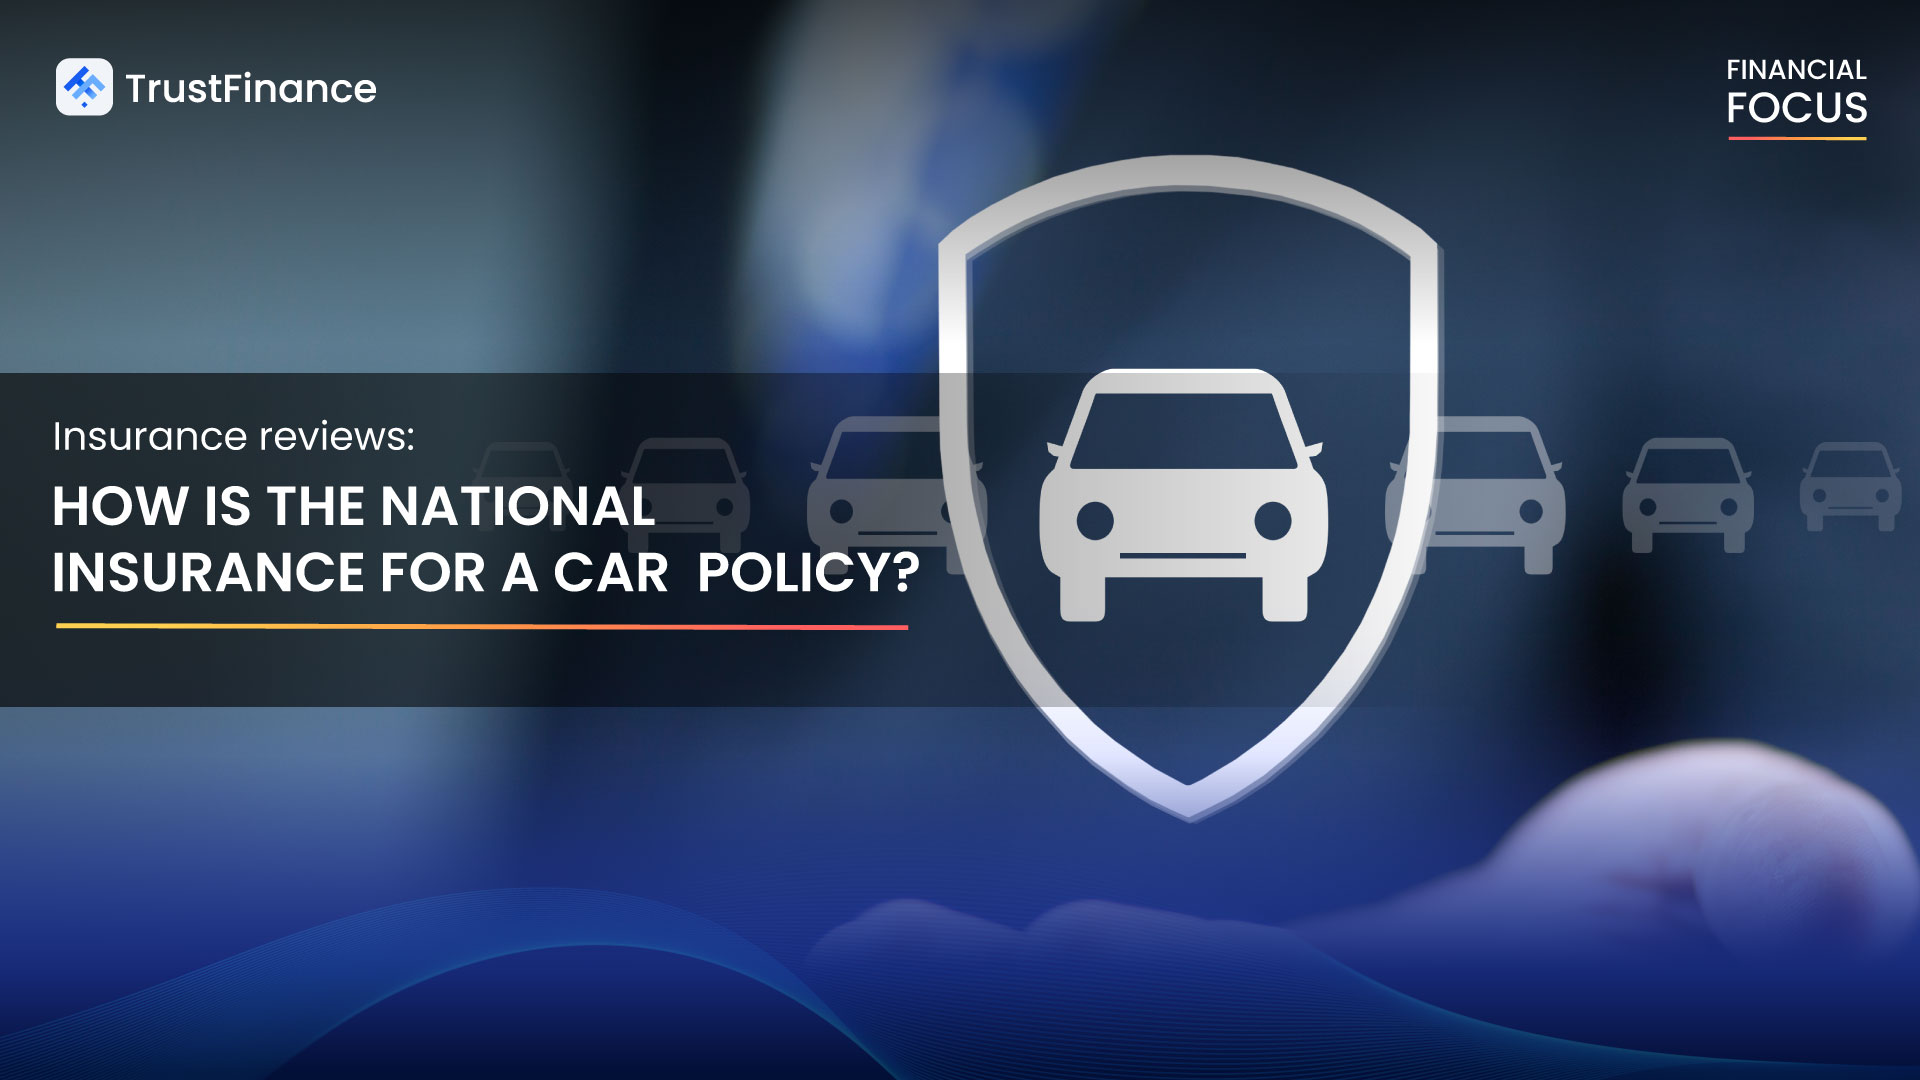 Insurance review: How is the national insurance for a car policy?